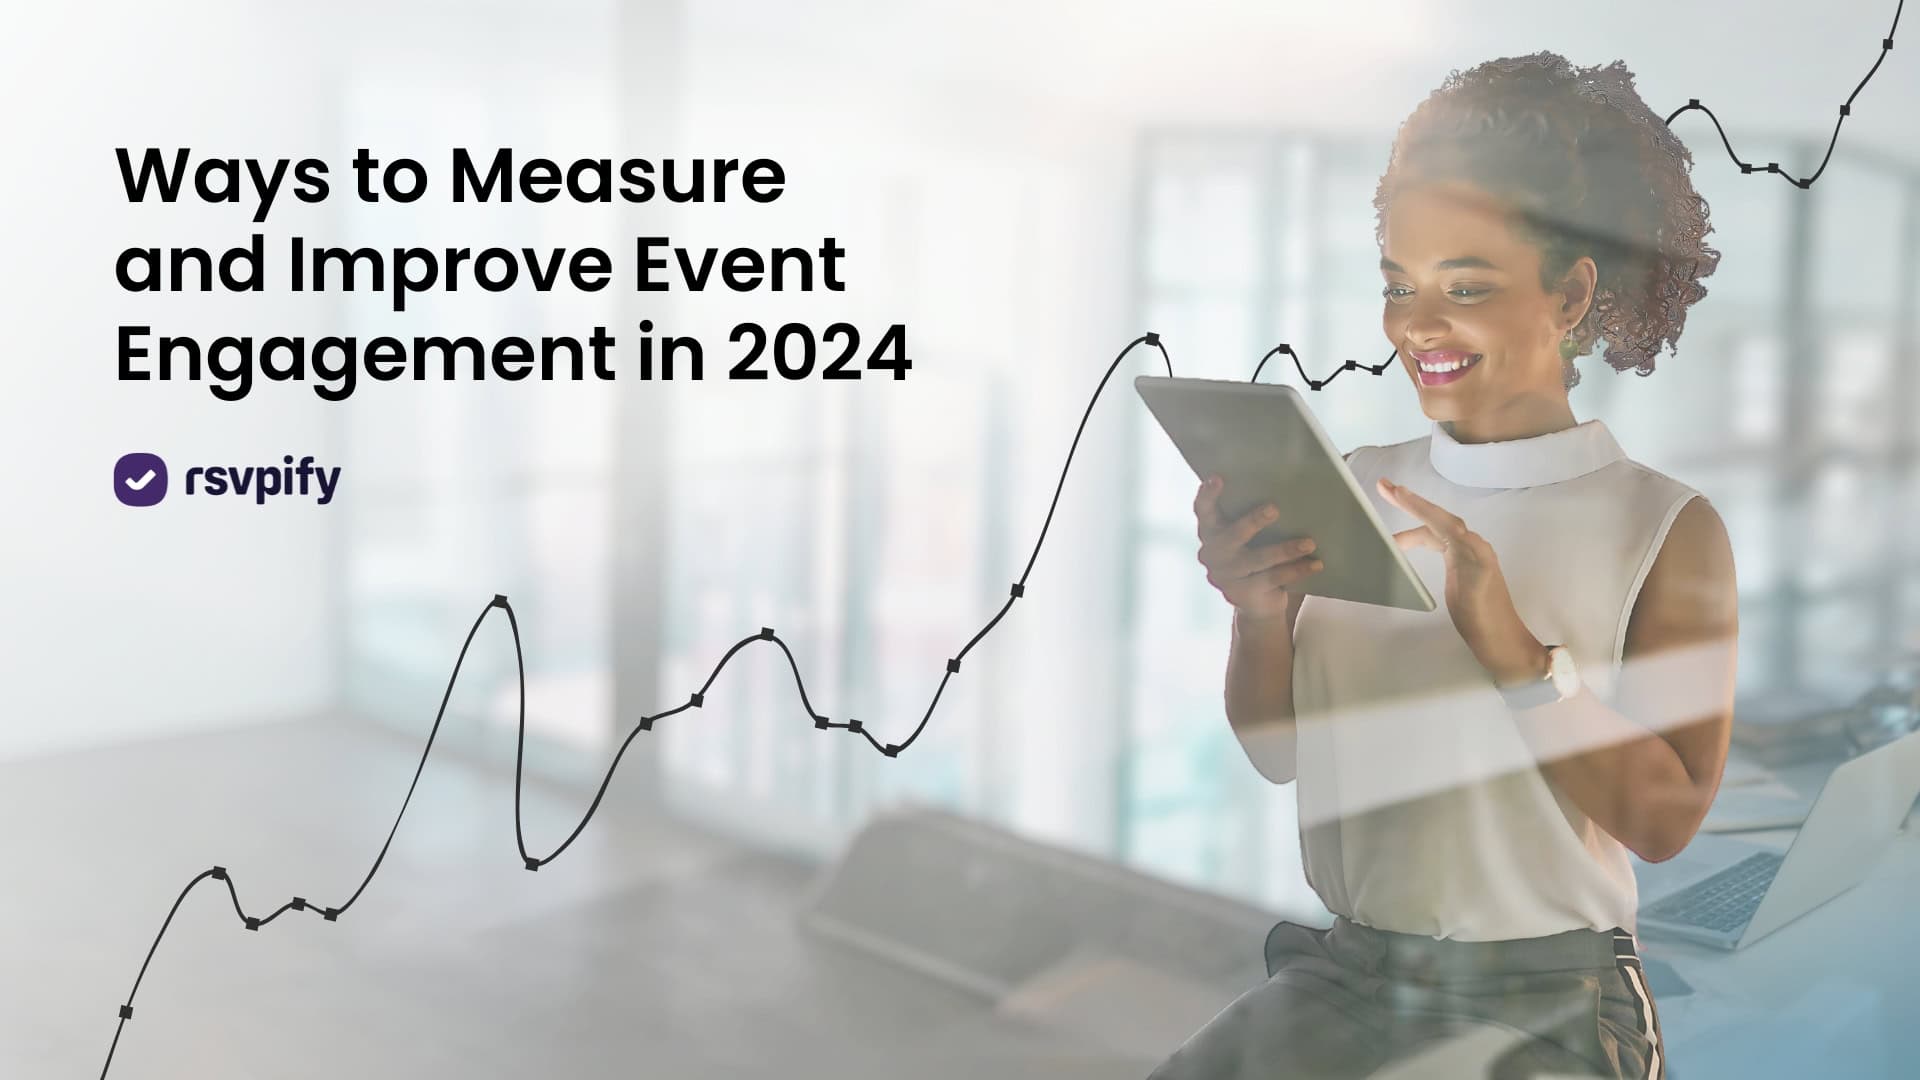 Learn some ways to improve event engagement in 2024